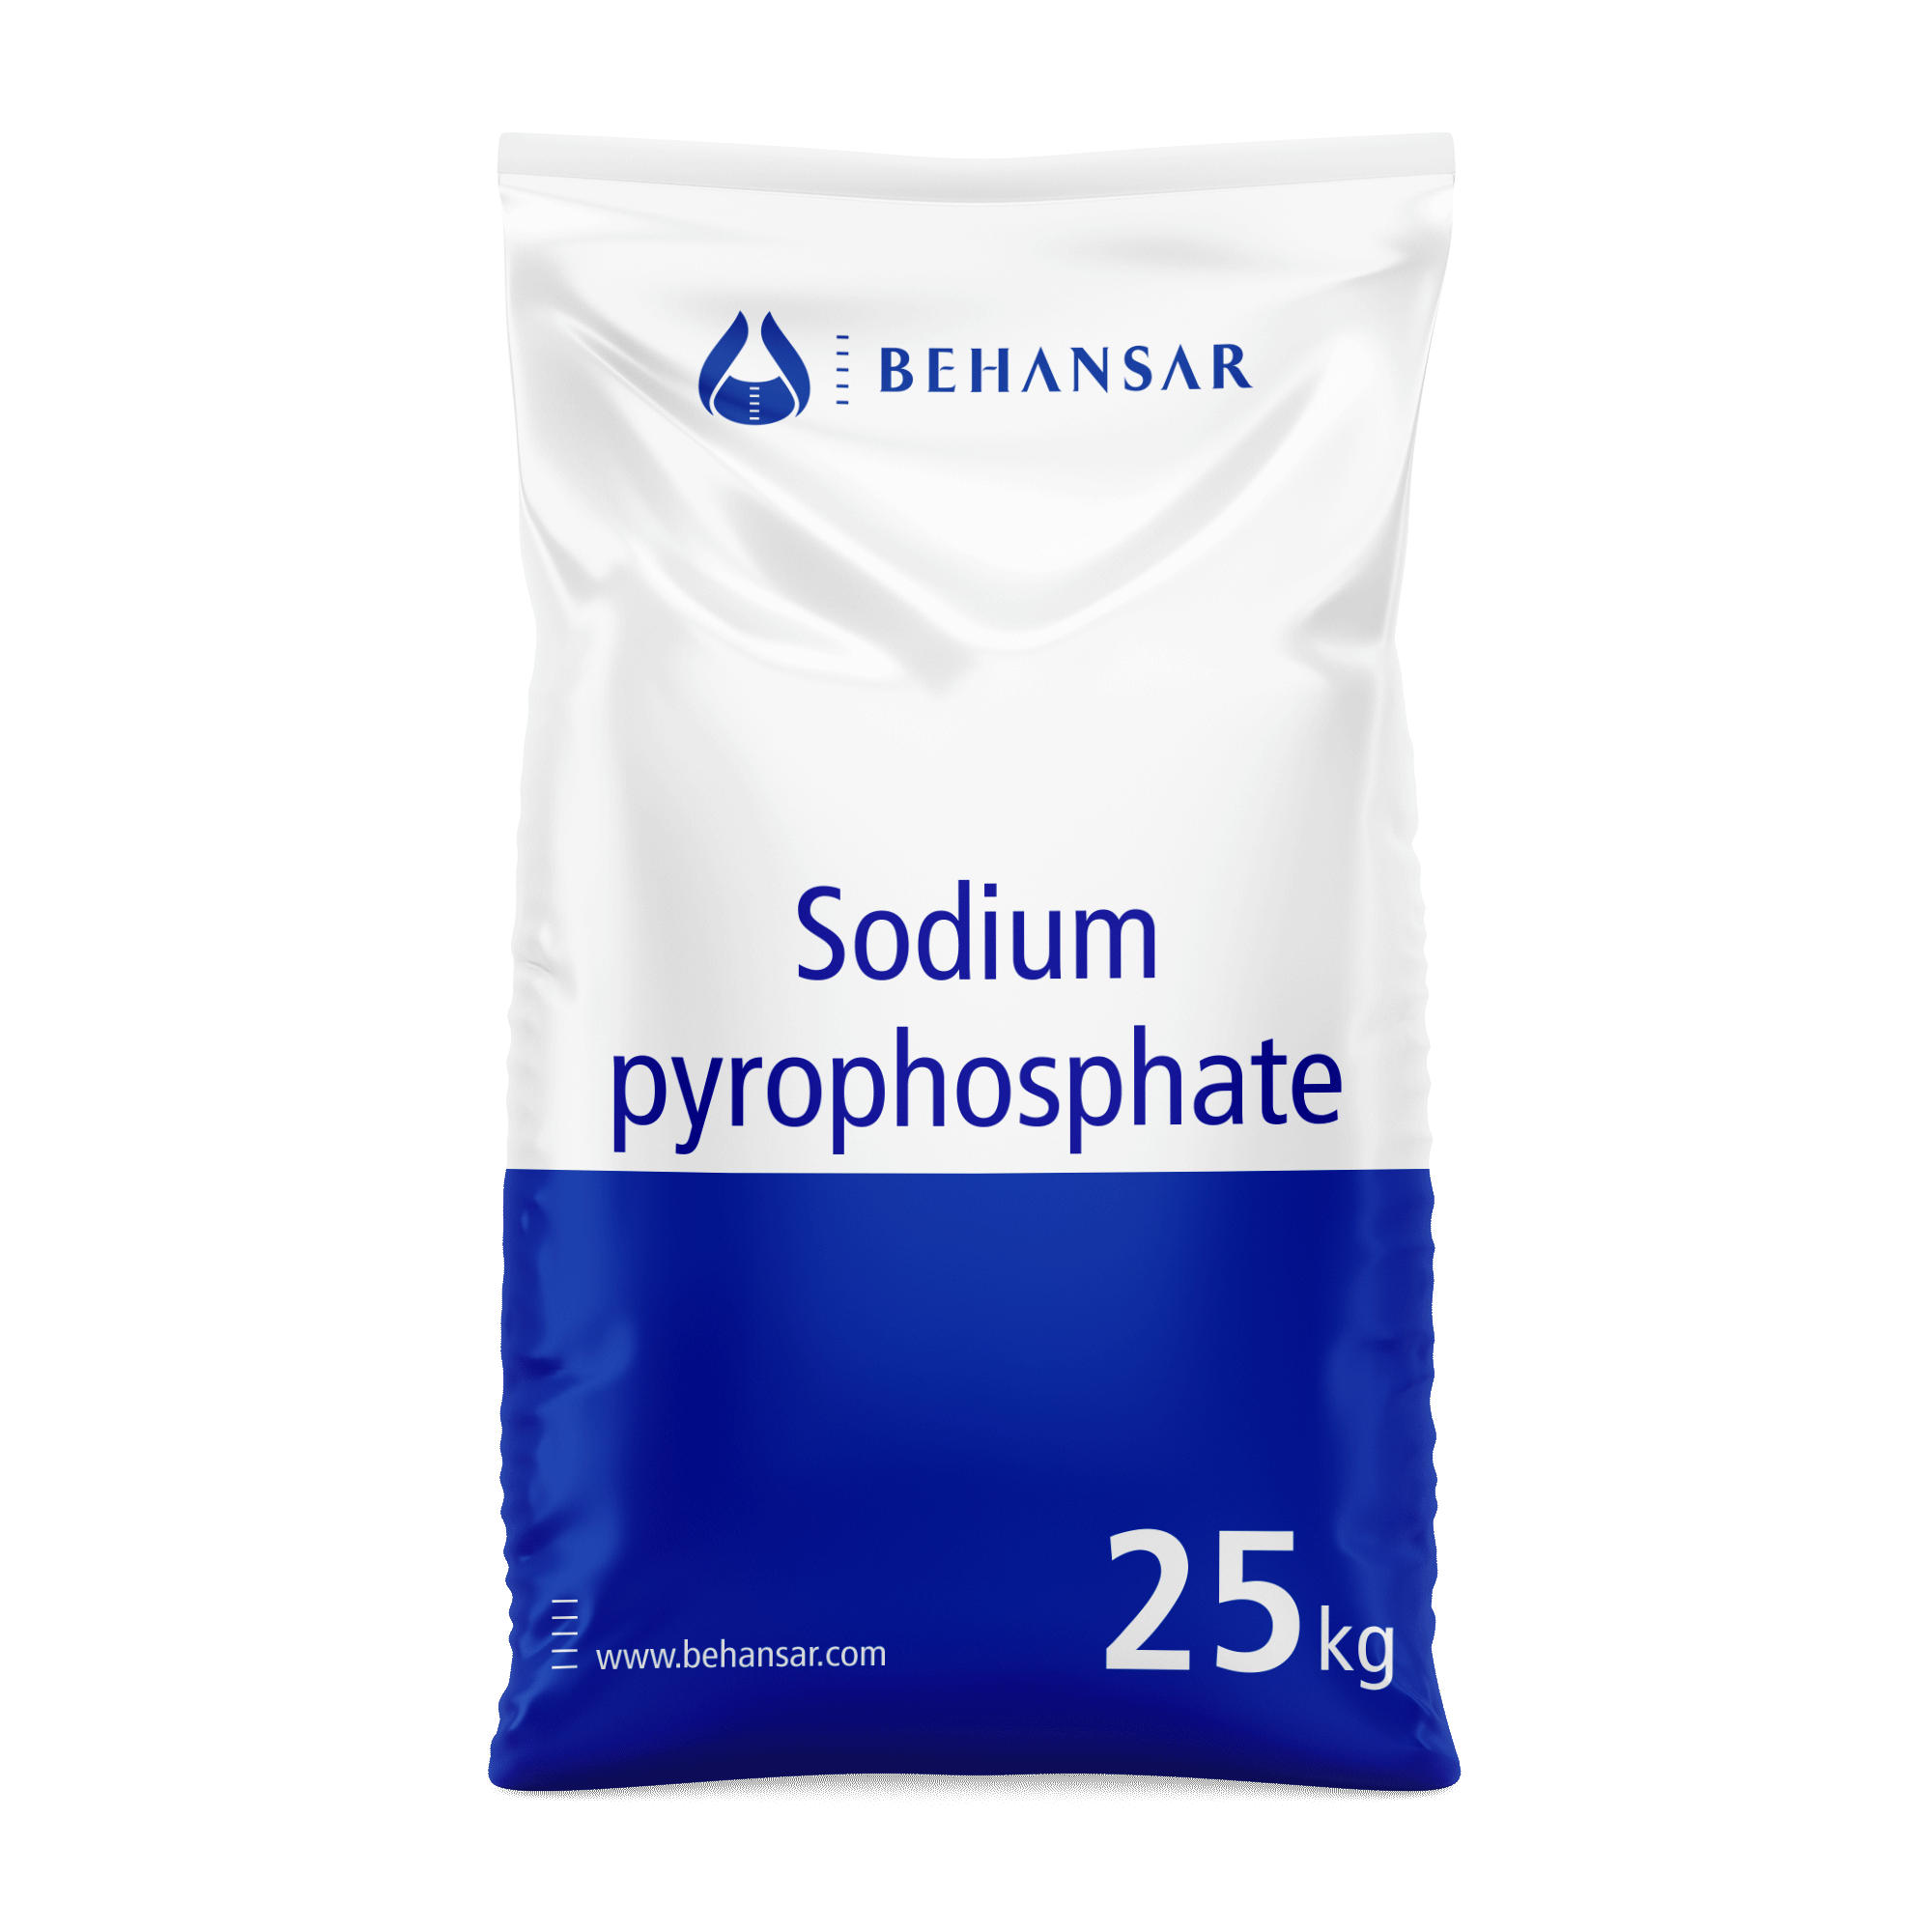 Sodium pyrophosphate is one of the products of Behansar Co